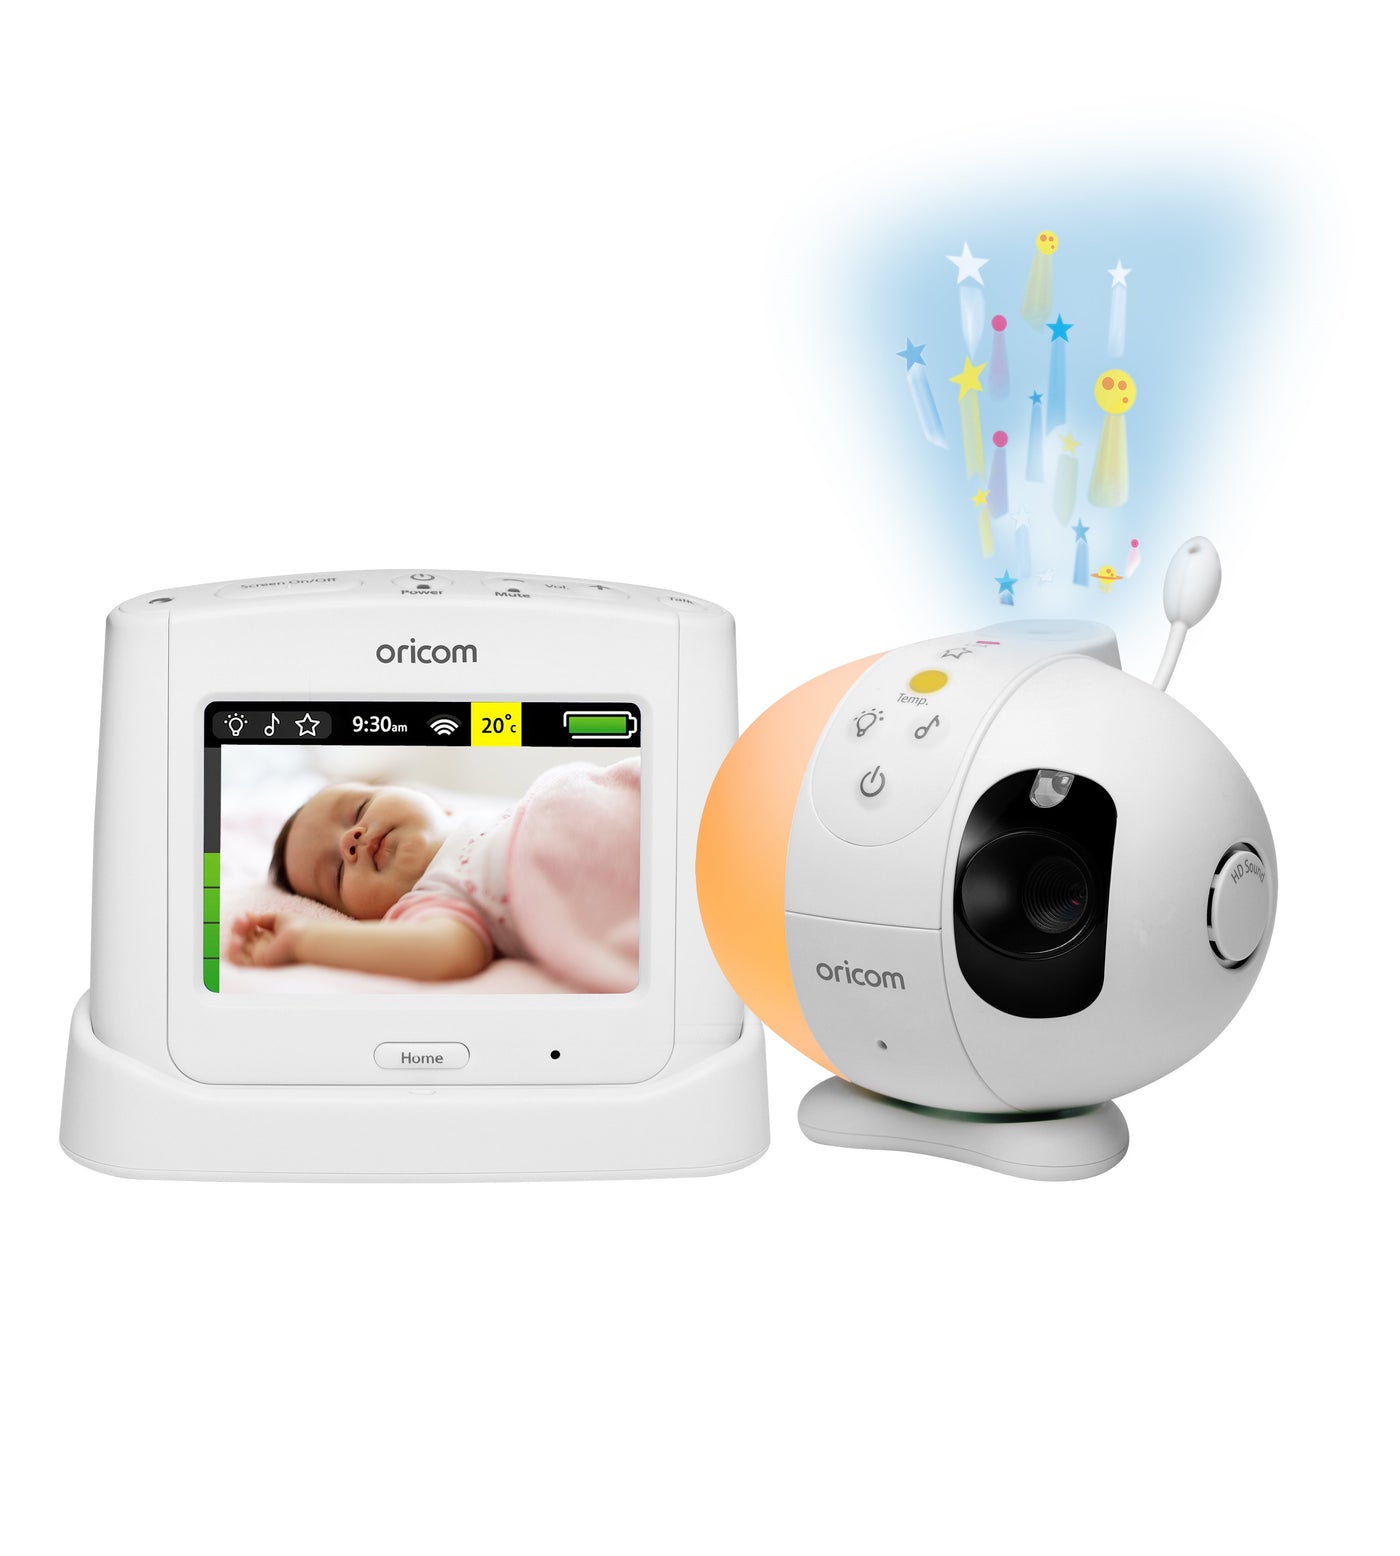 Secure870 3.5" Touchscreen Baby Monitor - Belly Beyond 